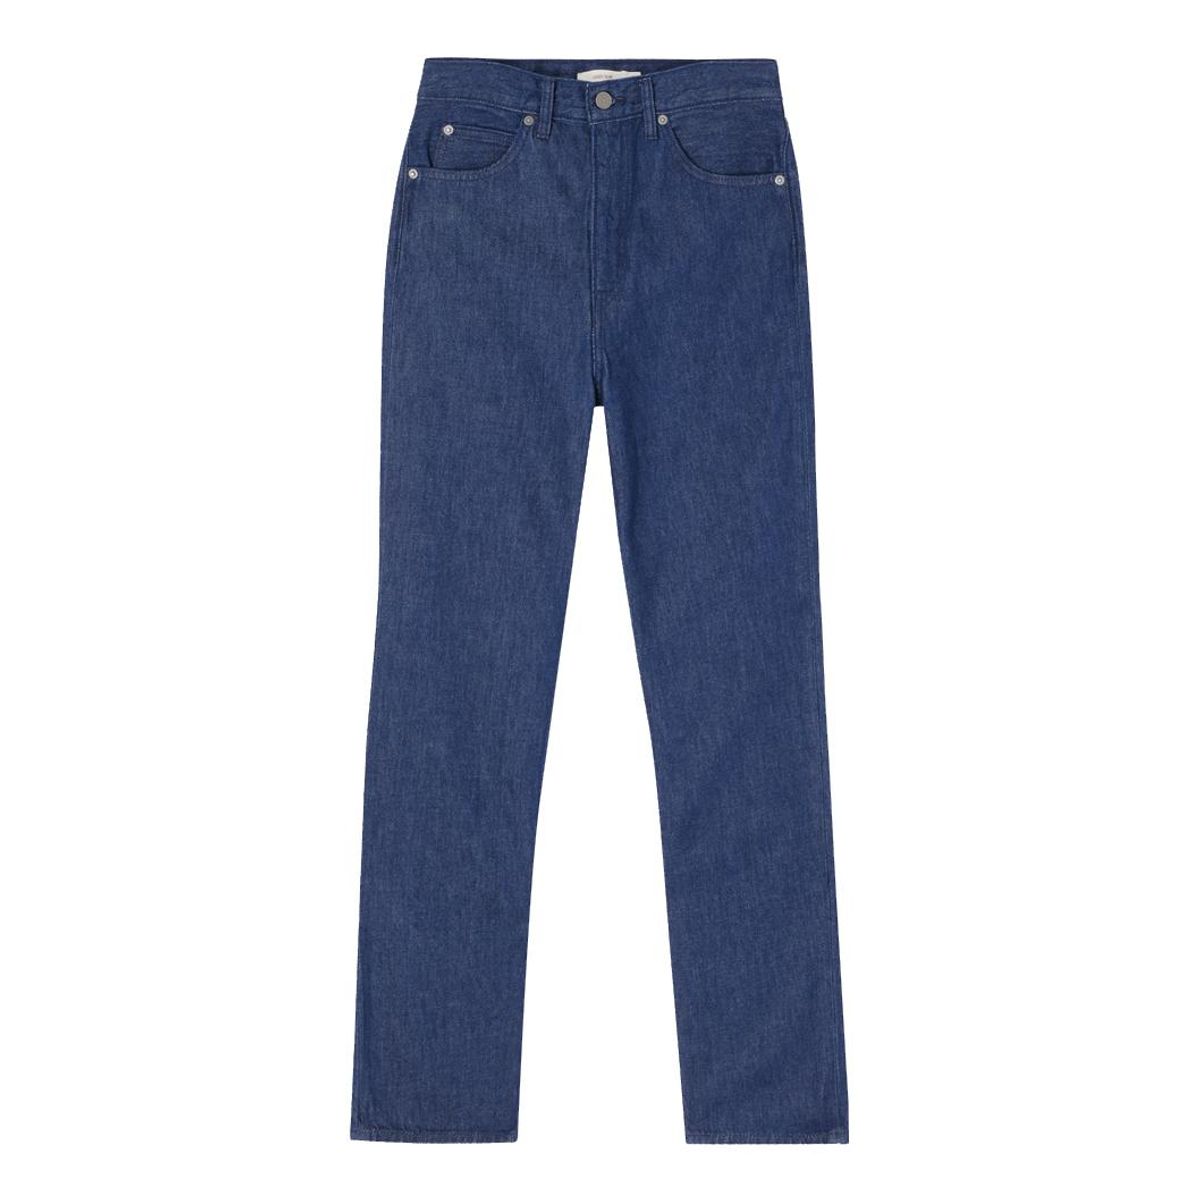 levis wellthread 70s high rise straight fit jeans